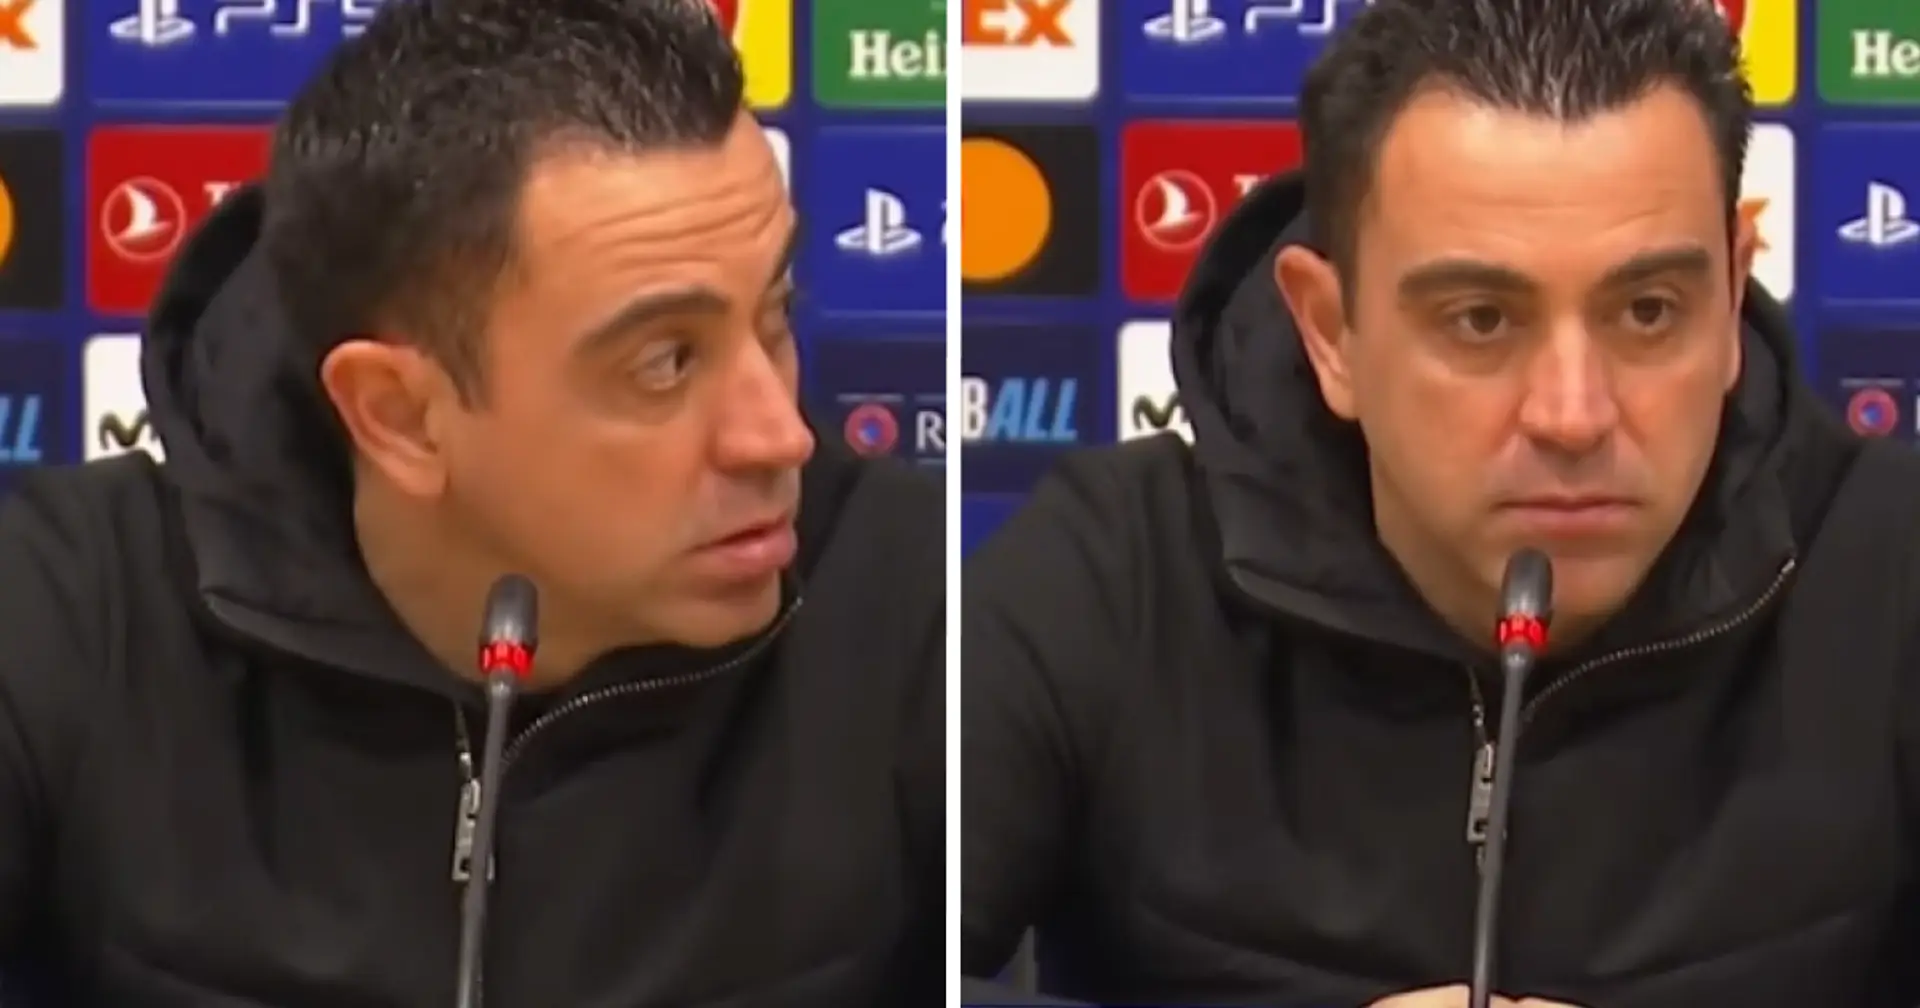 'You told me I'd get sacked': Xavi attacks Spanish journalists after Barca's big win